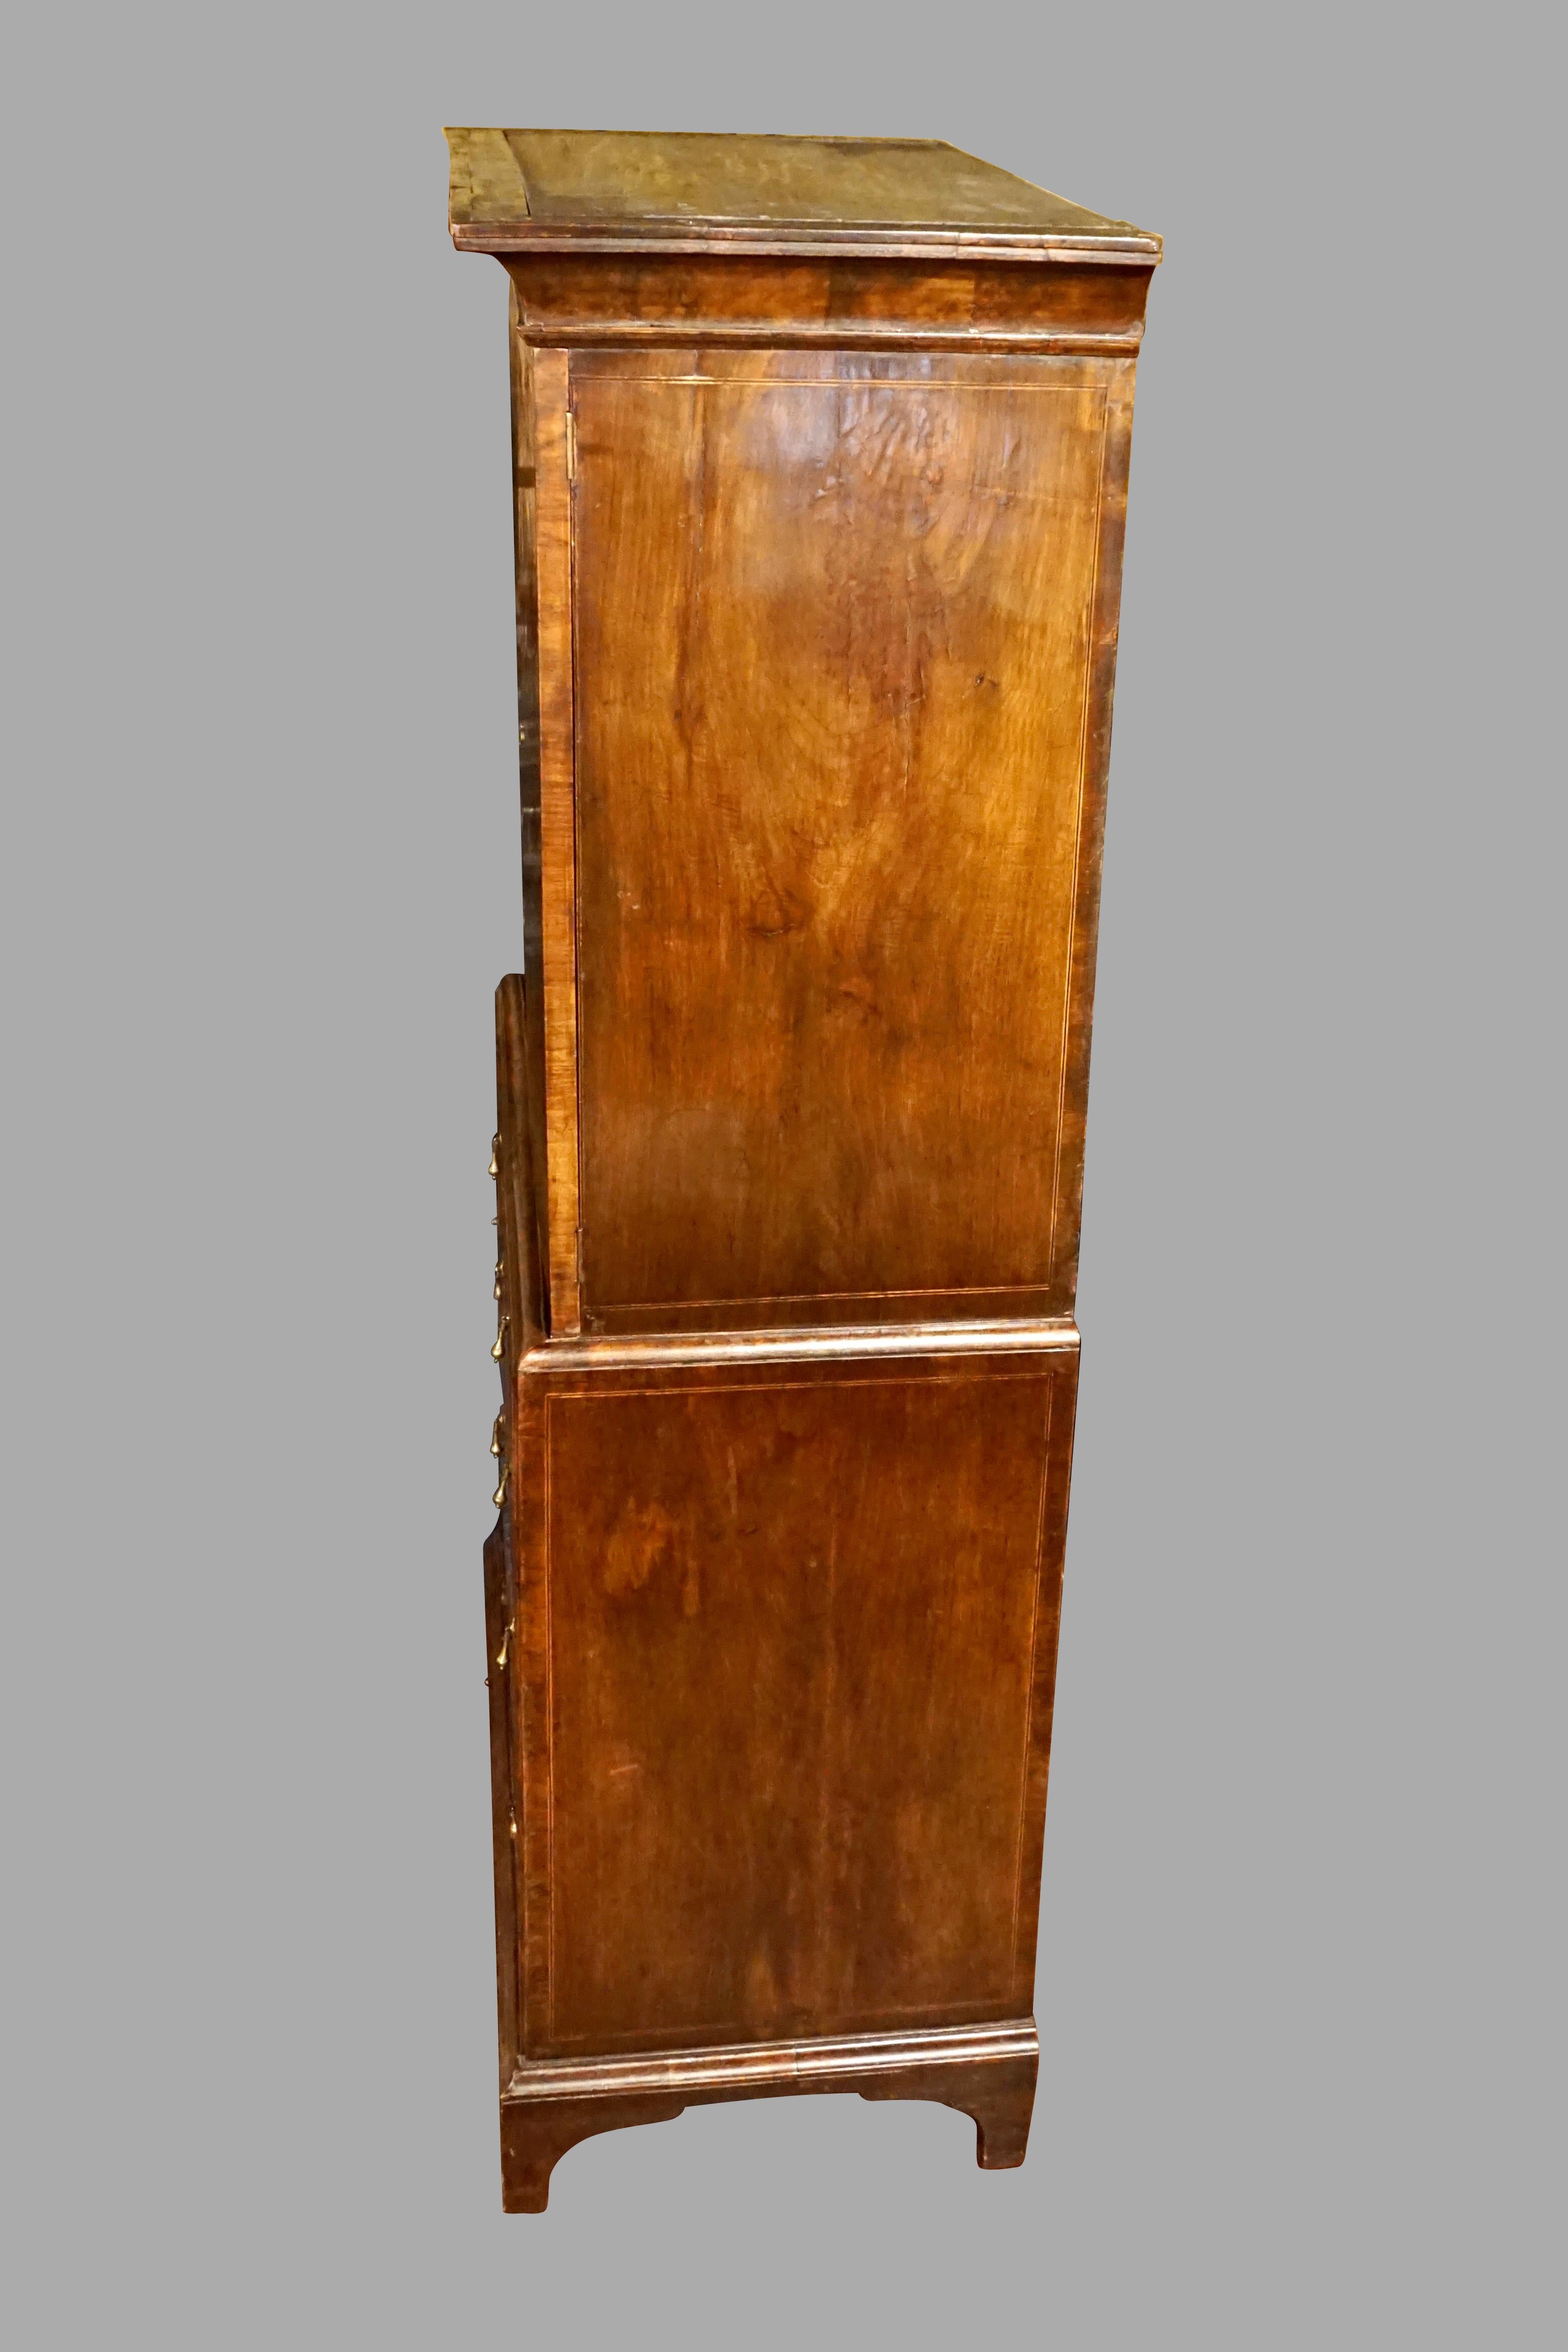 Fine Queen Anne Period Seaweed Marquetry Inlaid Walnut Cabinet-on-Chest  For Sale 3